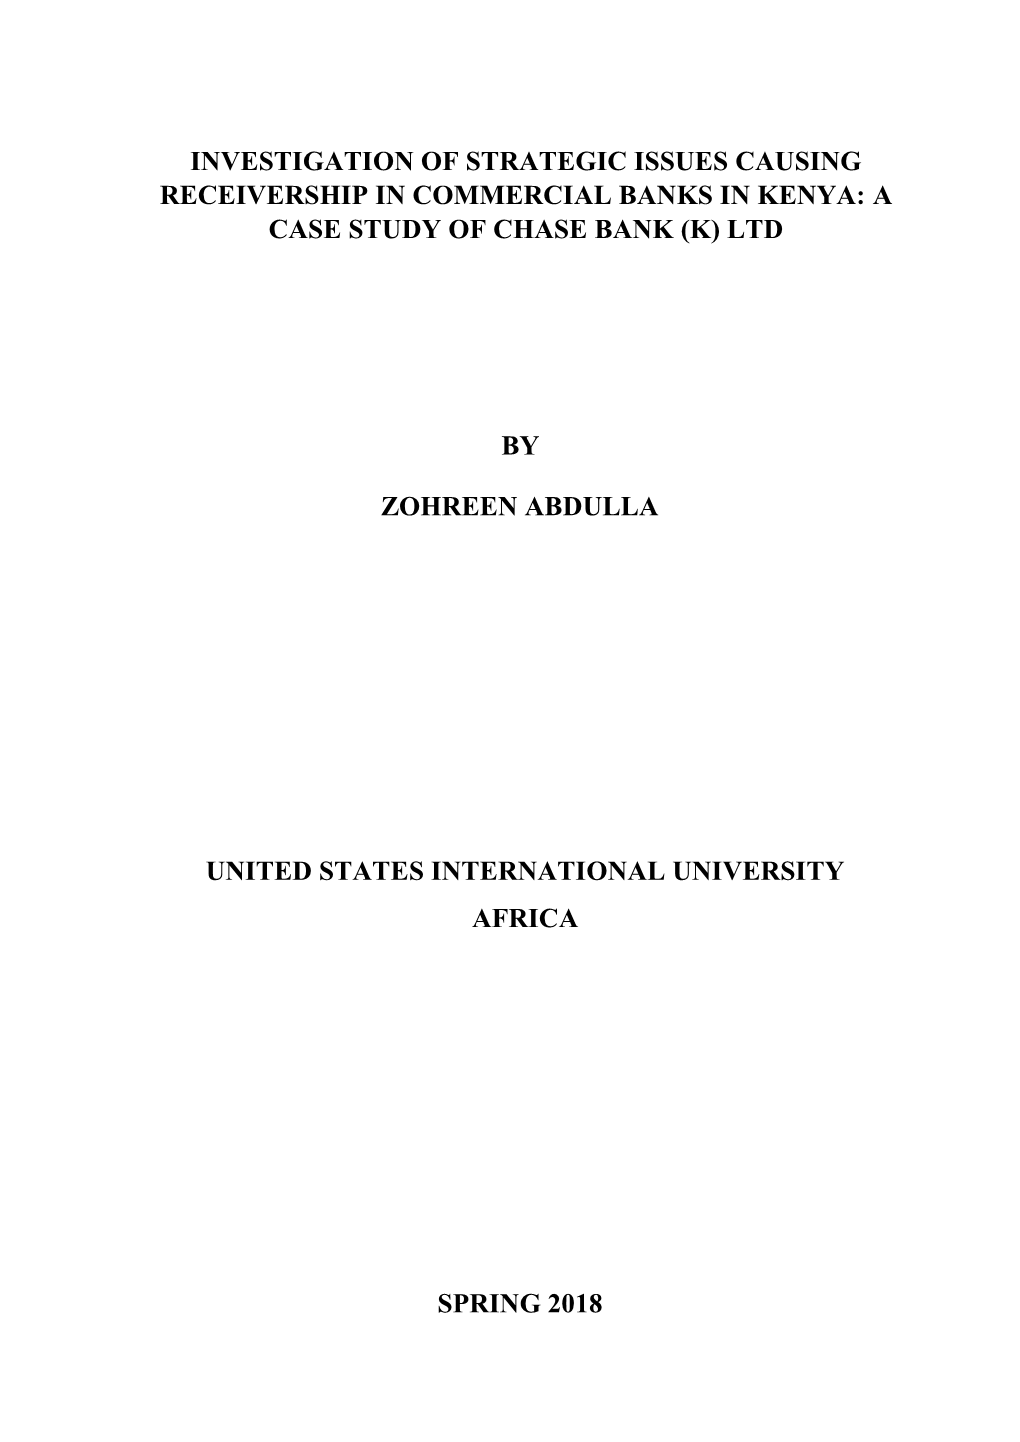 Investigation of Strategic Issues Causing Receivership in Commercial Banks in Kenya: a Case Study of Chase Bank (K) Ltd By